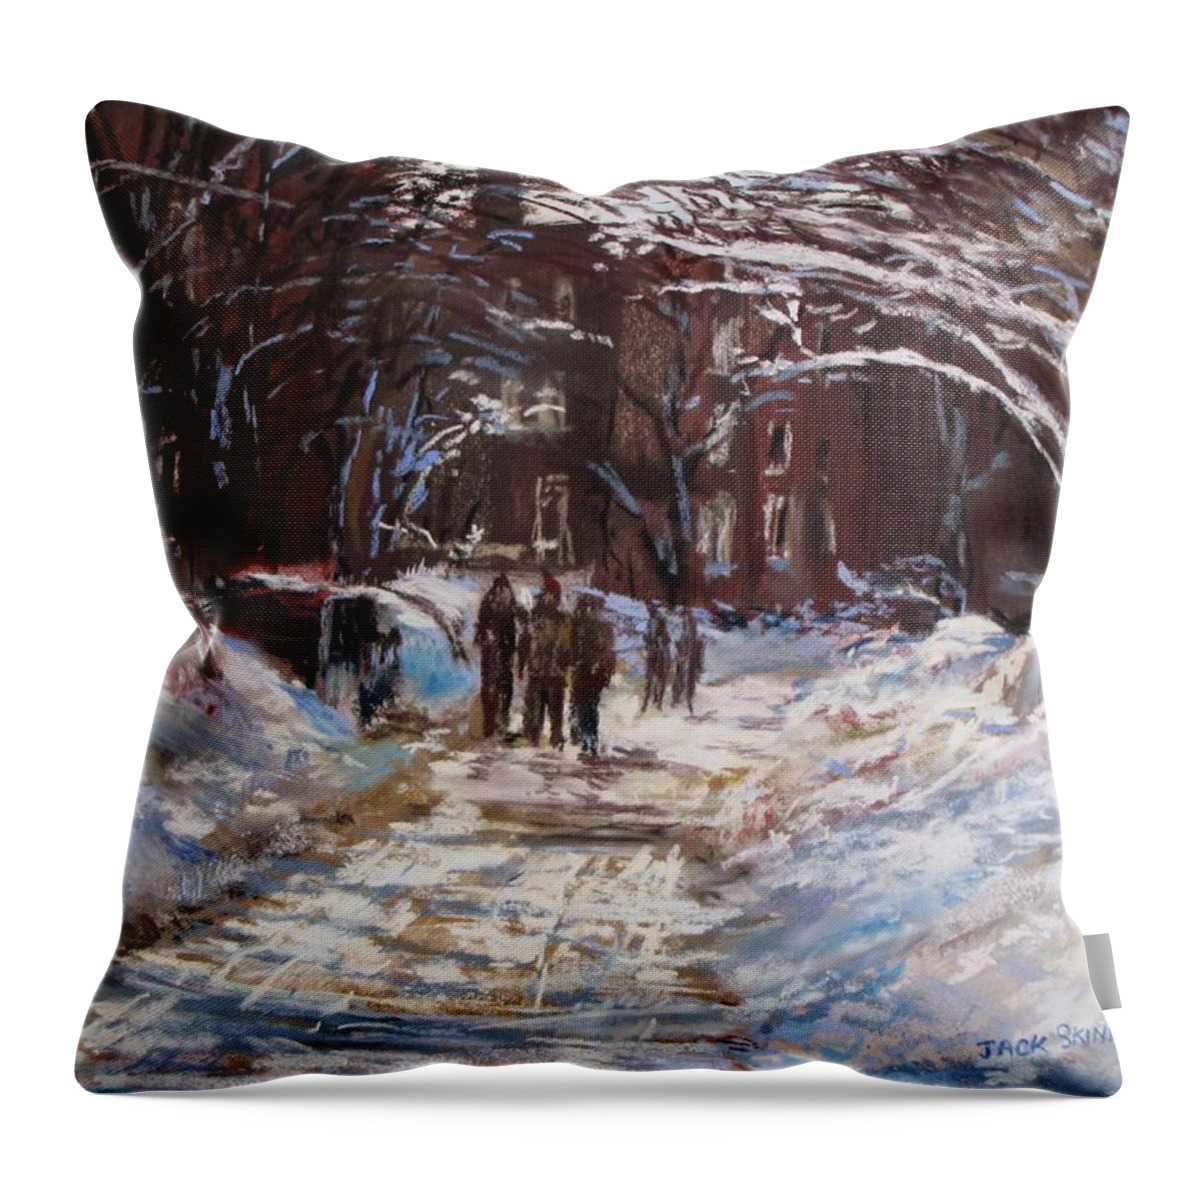  Snow Throw Pillow featuring the painting Snow in The City by Jack Skinner